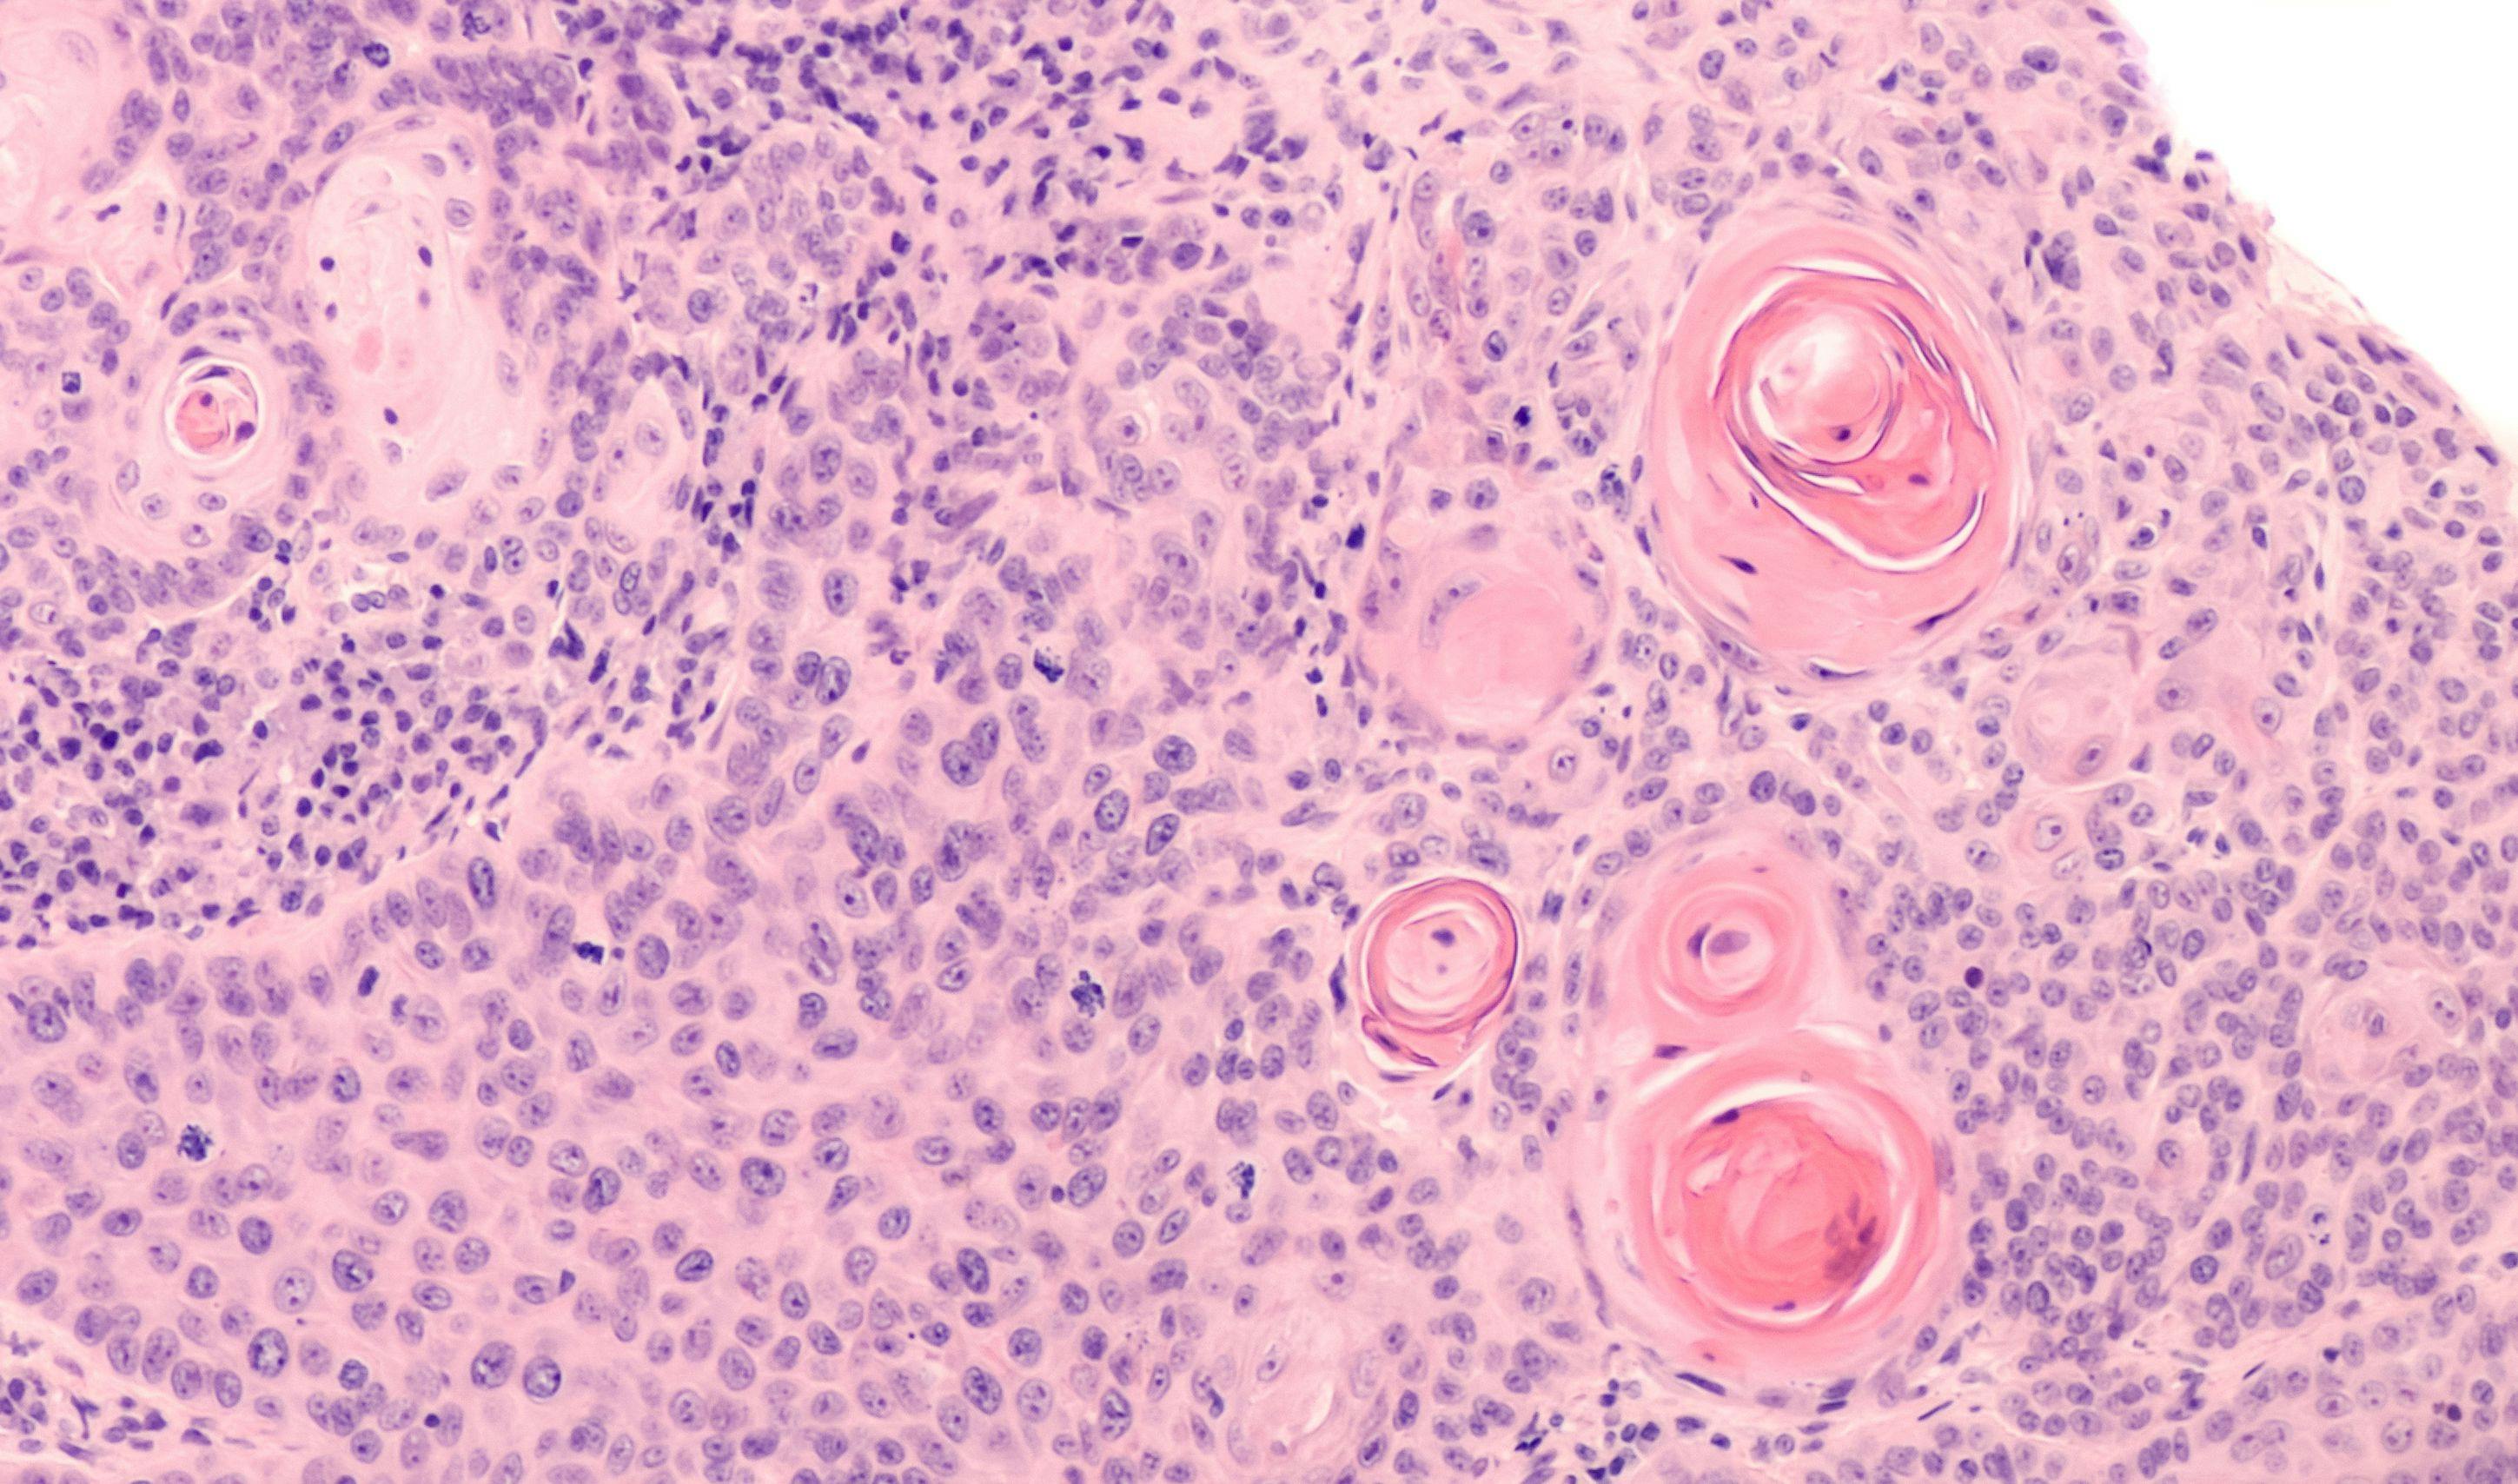 Lung Cancer: Photomicrograph of a CT (CAT) scan-guided needle core biopsy showing pulmonary squamous cell carcinoma, a type of non-small cell carcinoma usually associated with smoking | Image Credit: © David A Litman - stock.adobe.com 